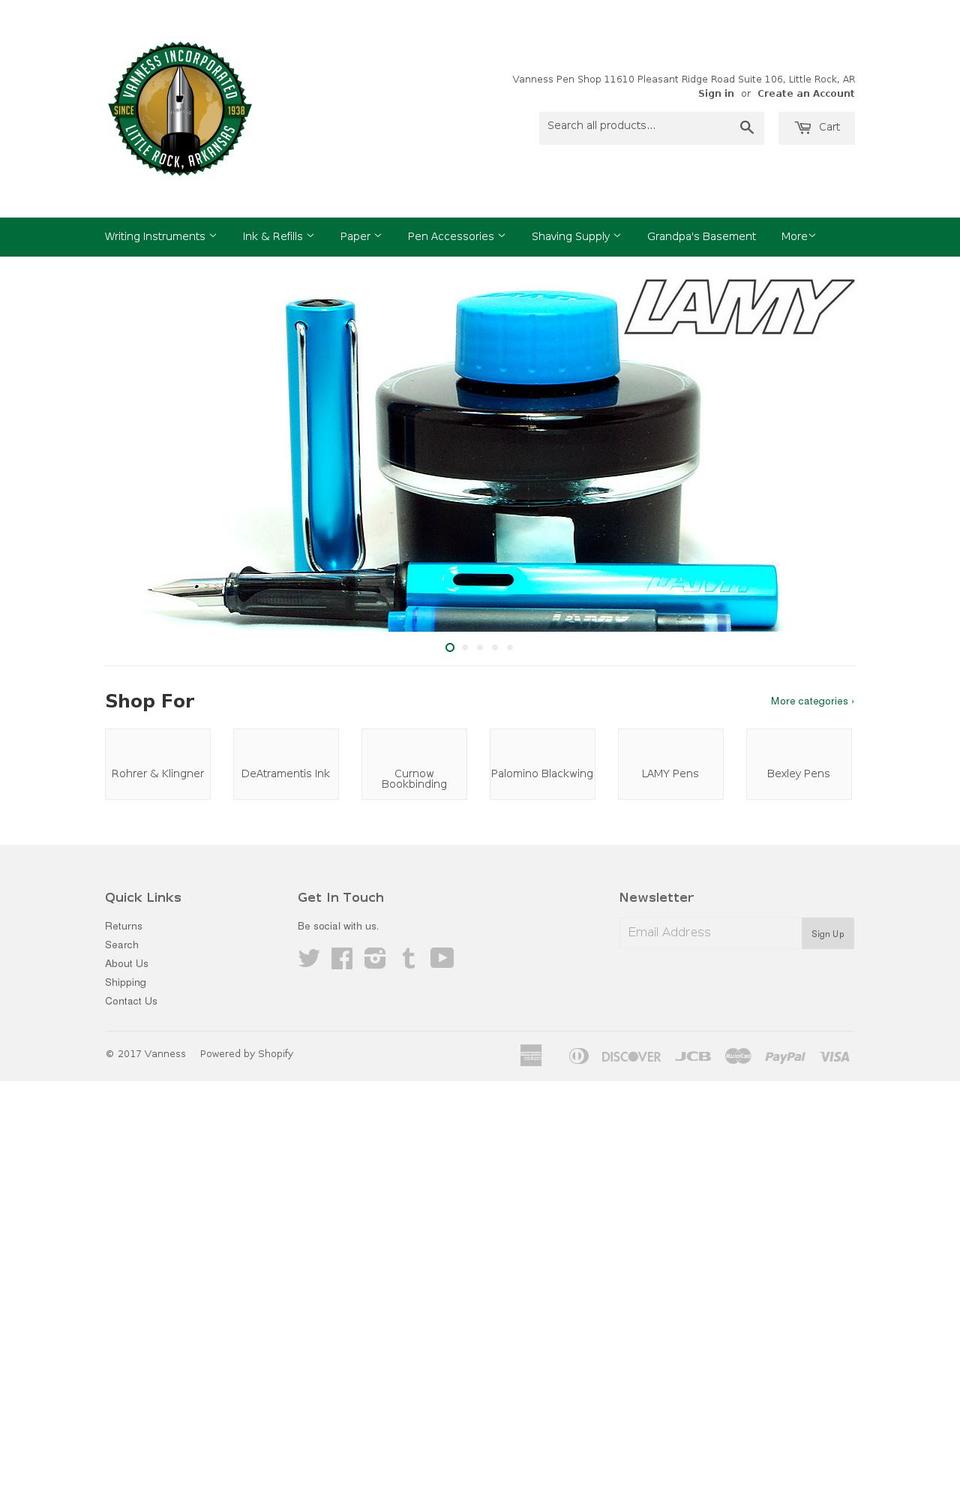 Focal Shopify theme site example vanness1938.com